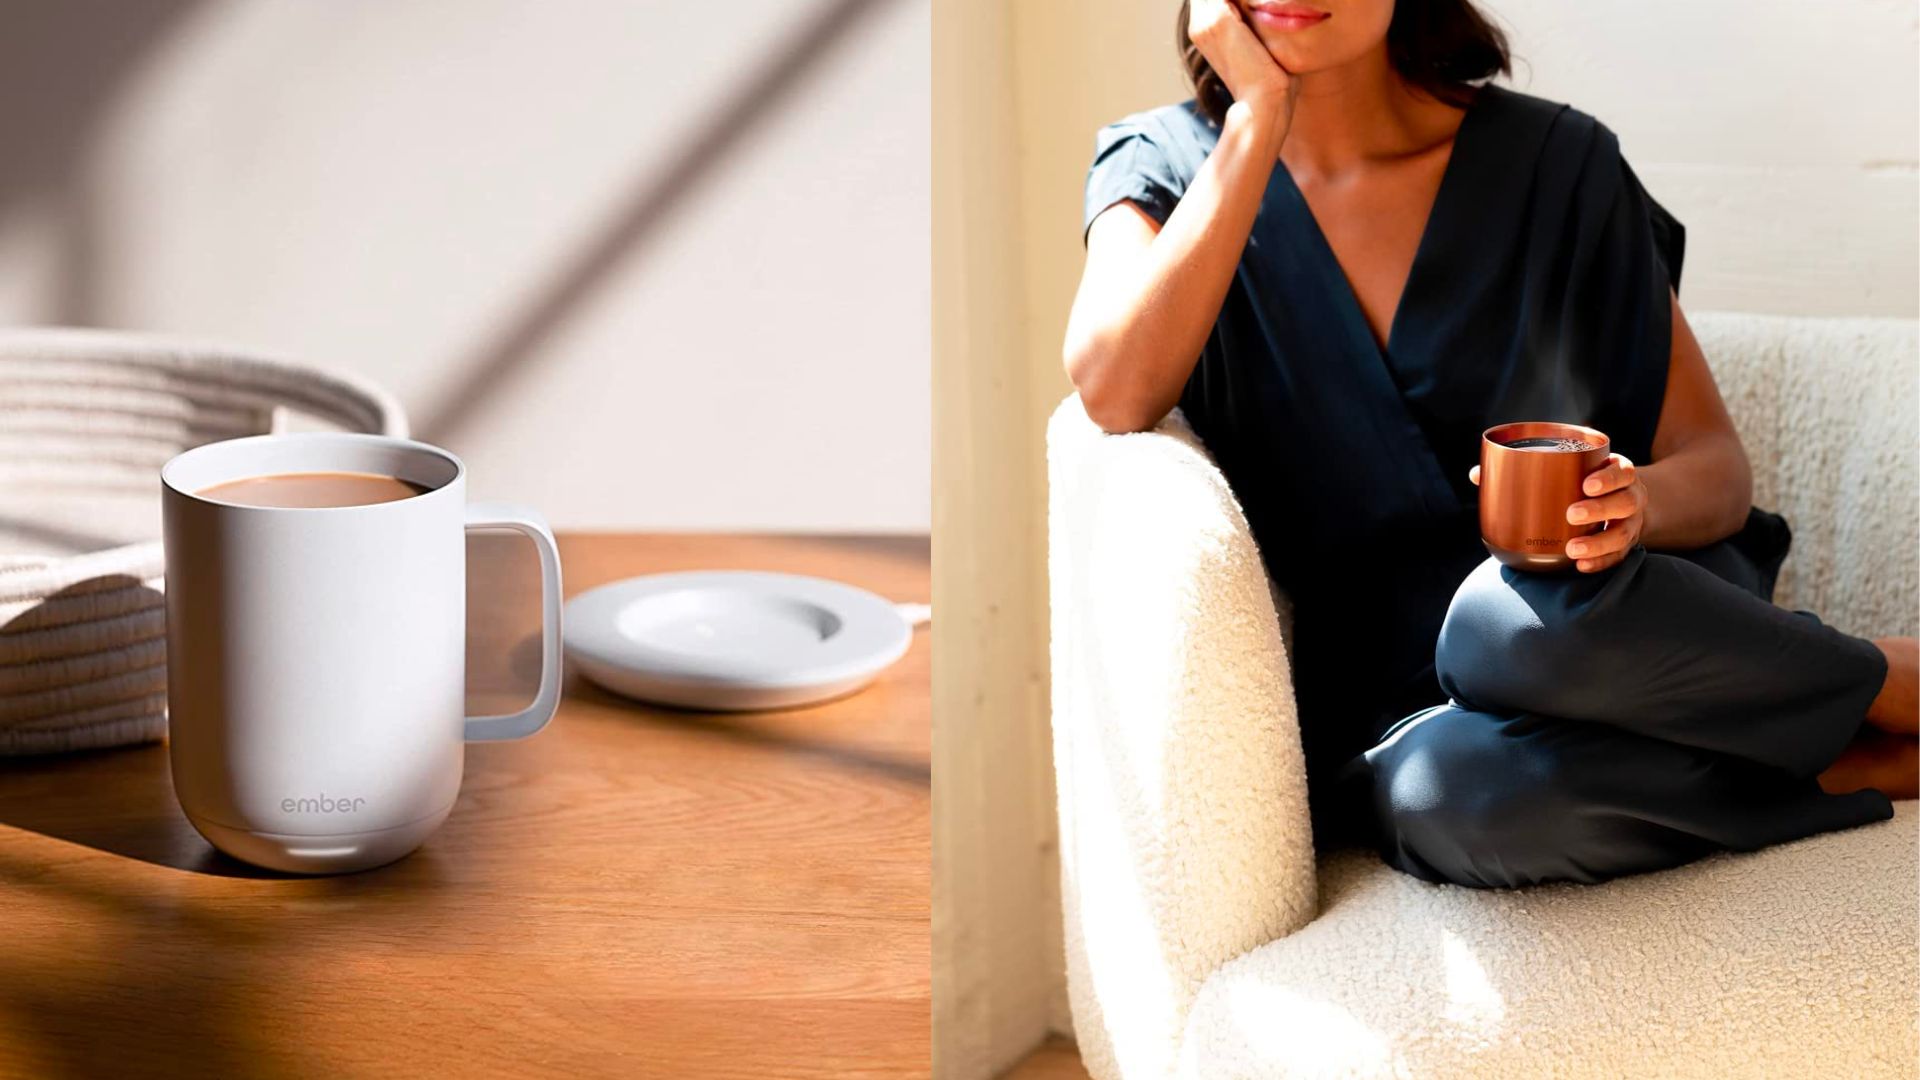 Best Smart Mugs 2023: Temperature-Controlled Mugs to Keep Coffee Warm